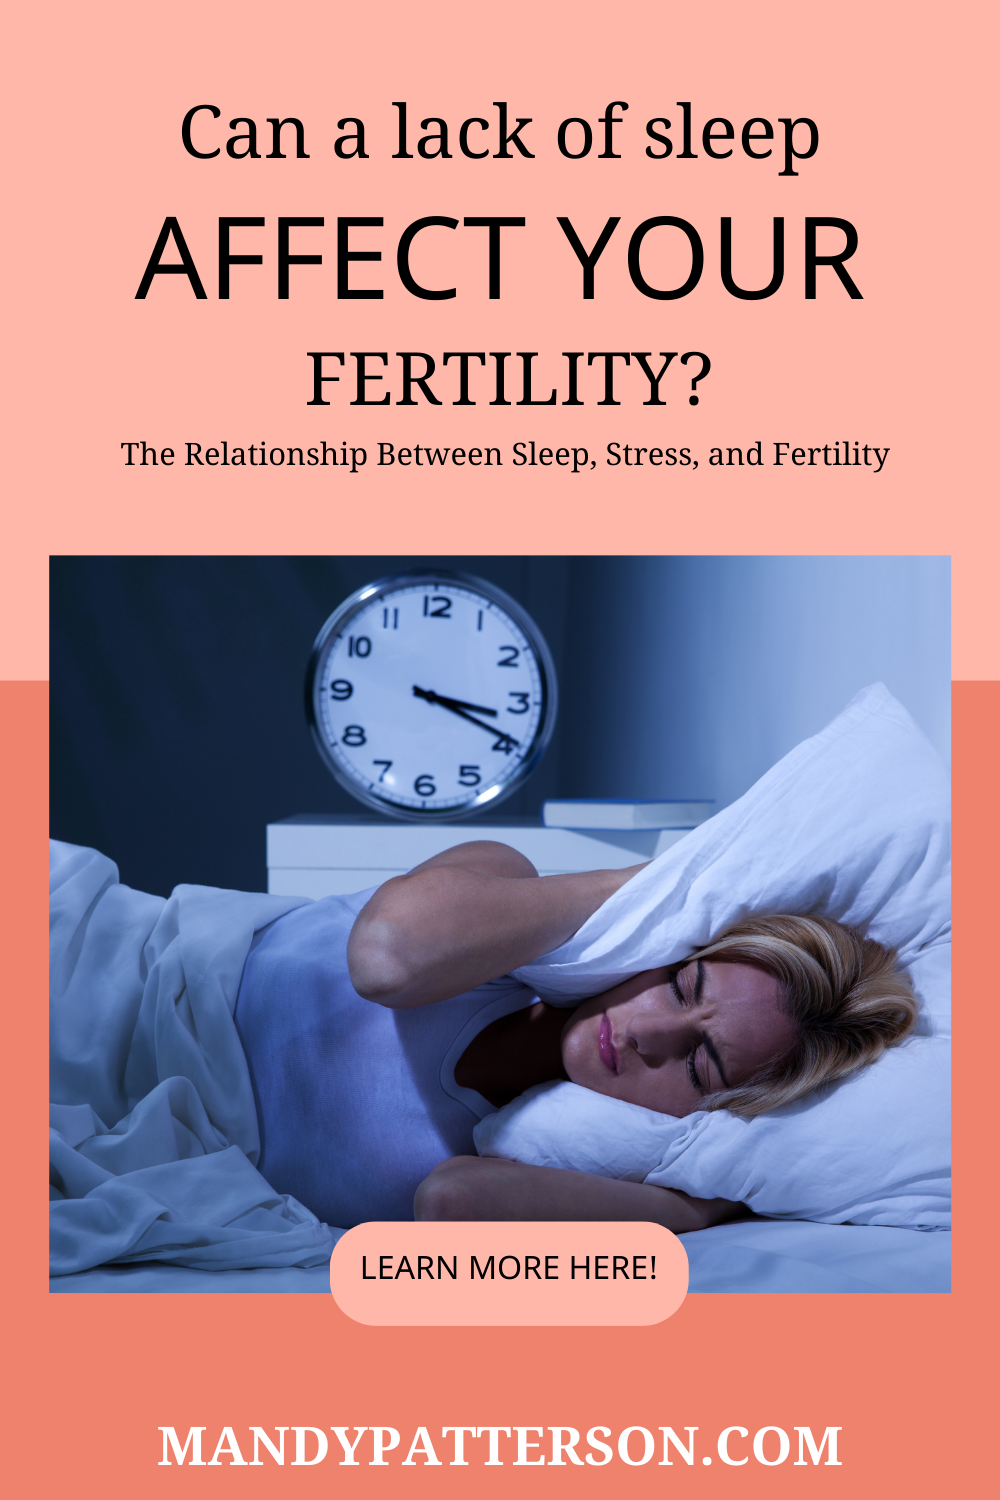 Can Lack of Sleep Affect Your Fertility? –  The Relationship Between Sleep, Stress, and Fertility 